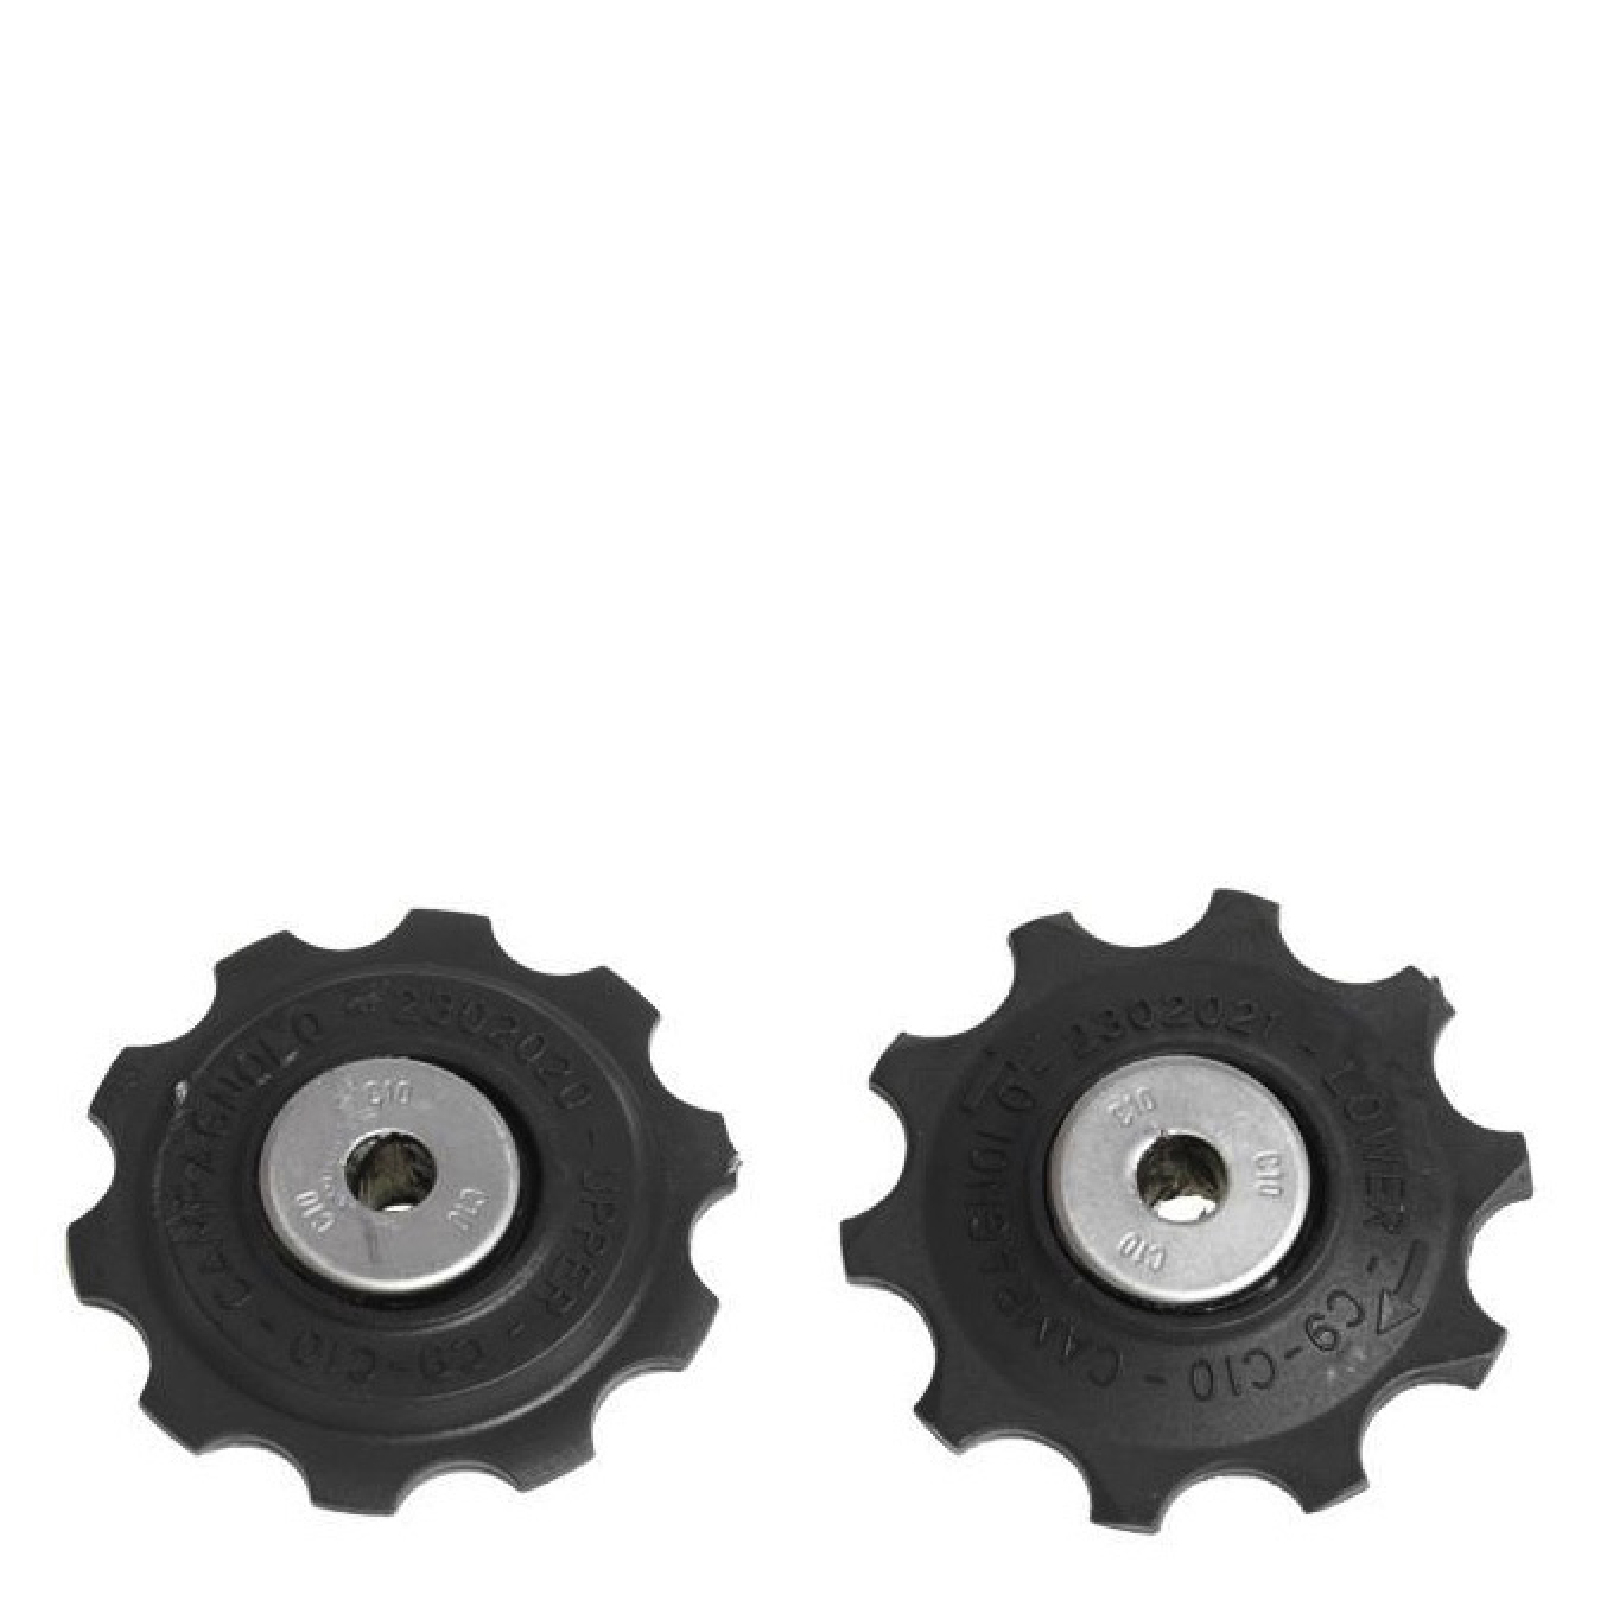 Image of Campagnolo 10X Jockey Wheels - One Option - One Colour